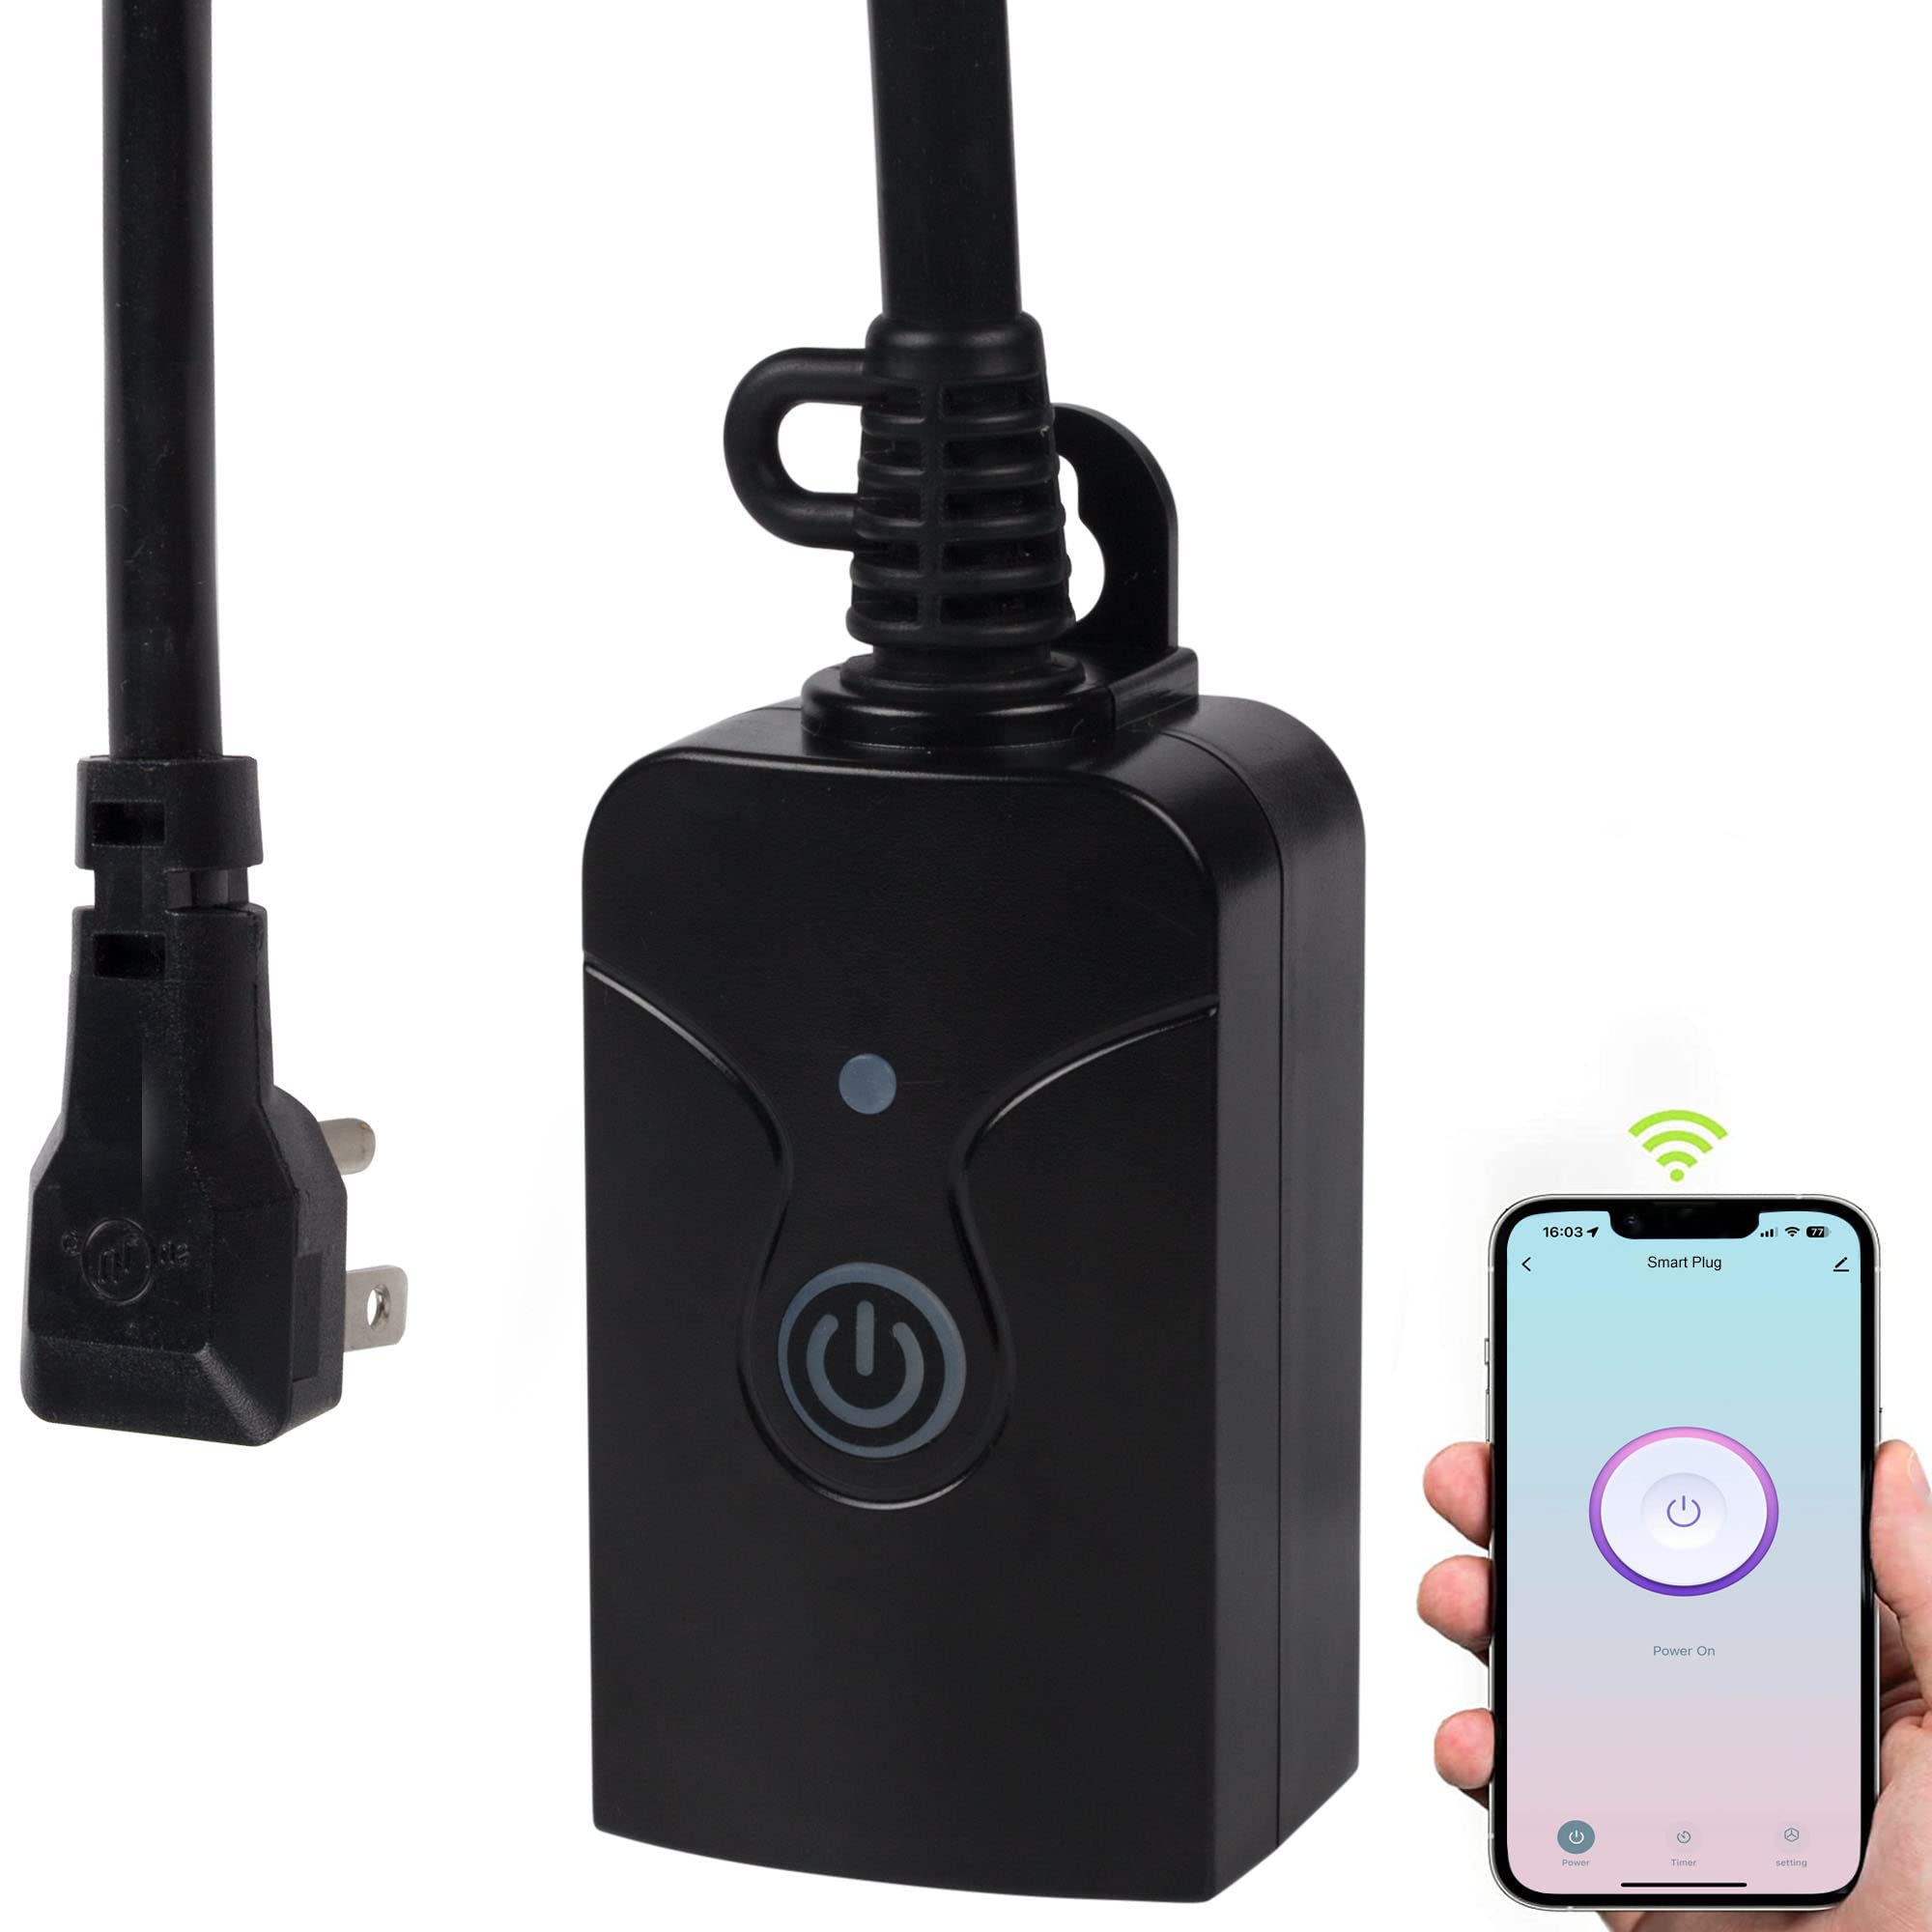 Enbrighten Outdoor Wi-Fi Plug-In Smart Dual Outlet, S/2